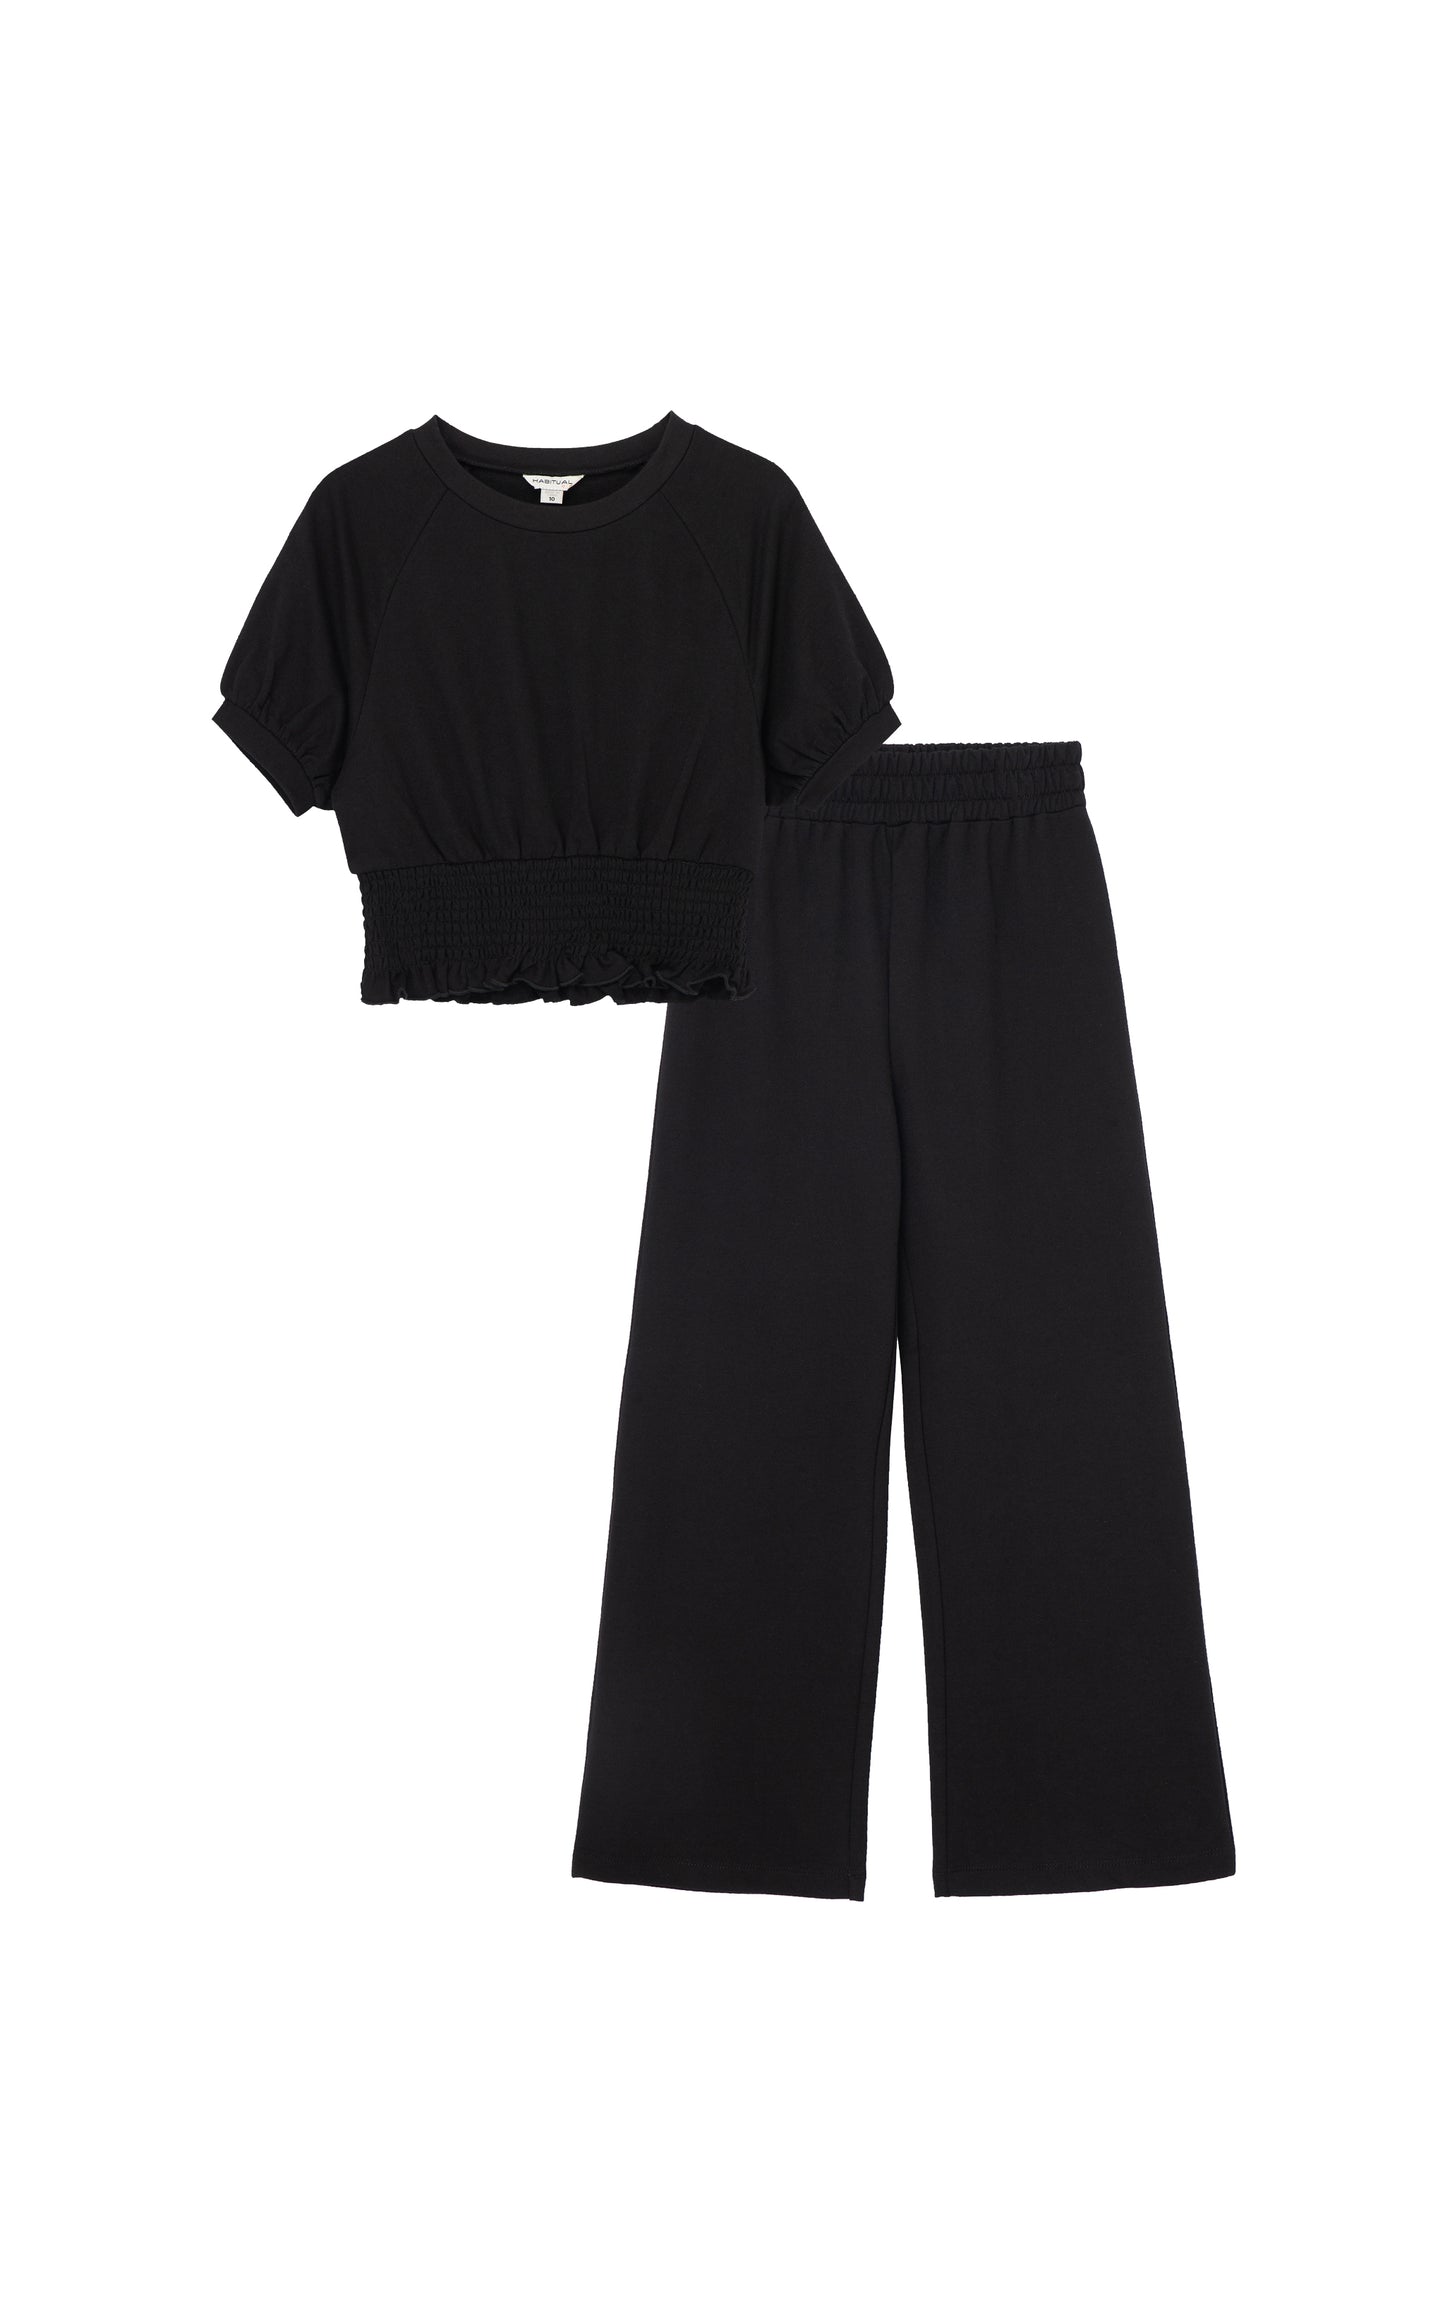 BLACK SHORT-SLEEVE SWEATSHIRT WITH RUCHED WAIST AND MATCHING SWEATPANTS WITH RUCHED WAISTBAND AND FLARED BOTTOMS